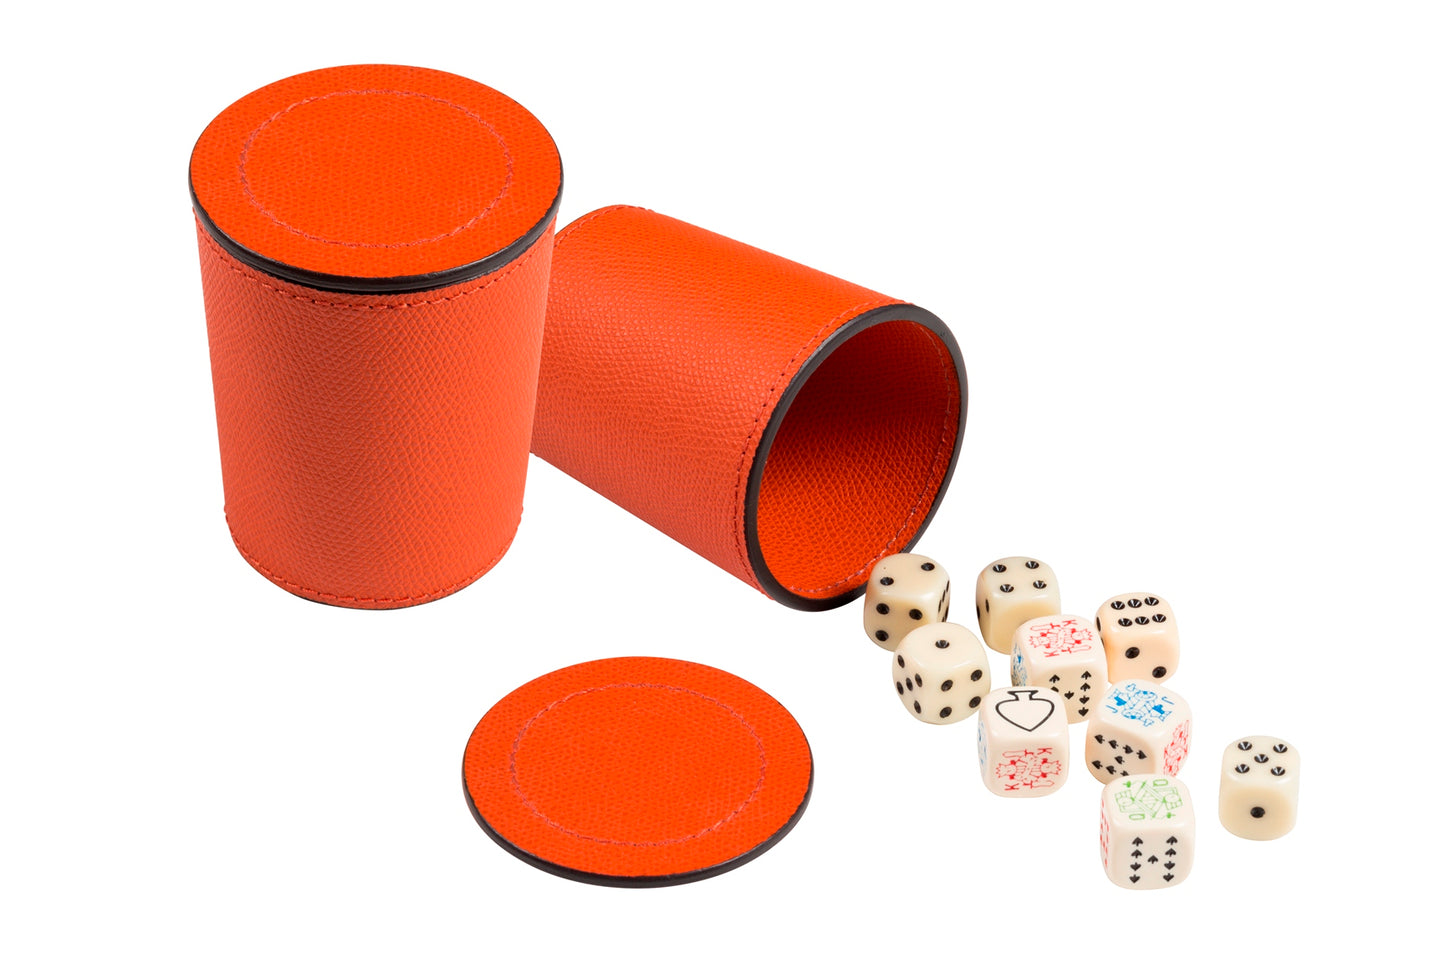 Giobagnara Dice Cup | All-Leather Structure | Includes 5 Standard Dice and 5 Poker Dice | Perfect for Game Nights and Yachting Entertainment | Explore Luxury Gaming Accessories at 2Jour Concierge, #1 luxury high-end gift & lifestyle shop